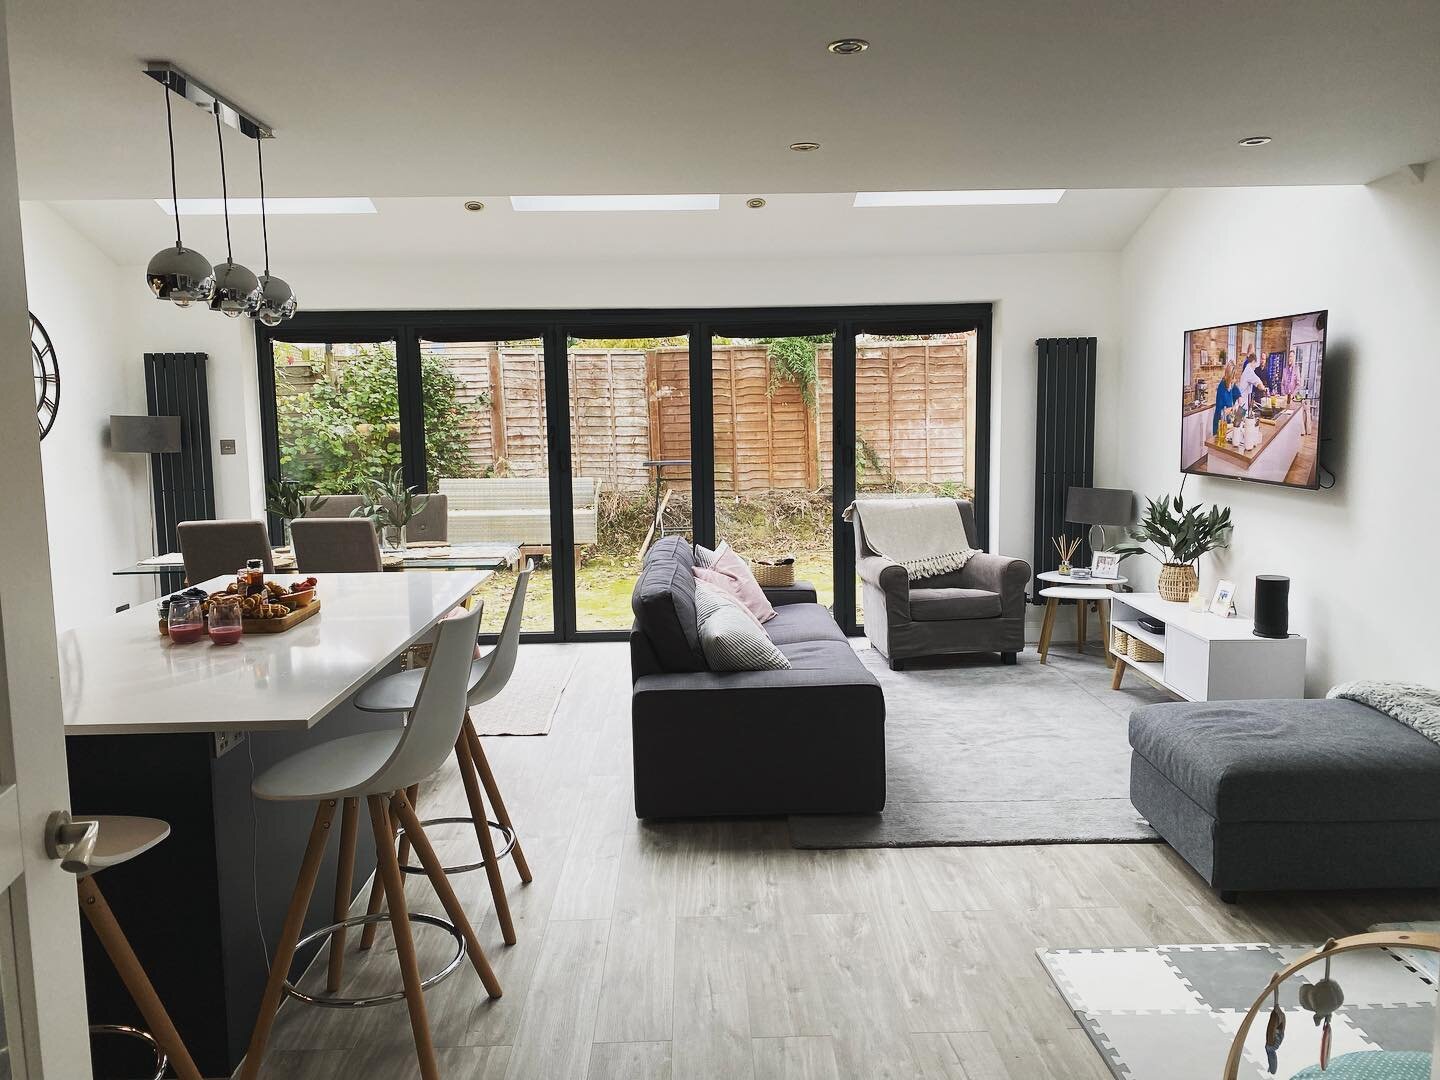 We&rsquo;re excited to start sharing some of the photos from the house renovation we completed in Horsham last year, starting with the open plan kitchen. 
👉🏼 Our customers moved into their new 3 bed house a few months before having their first chil